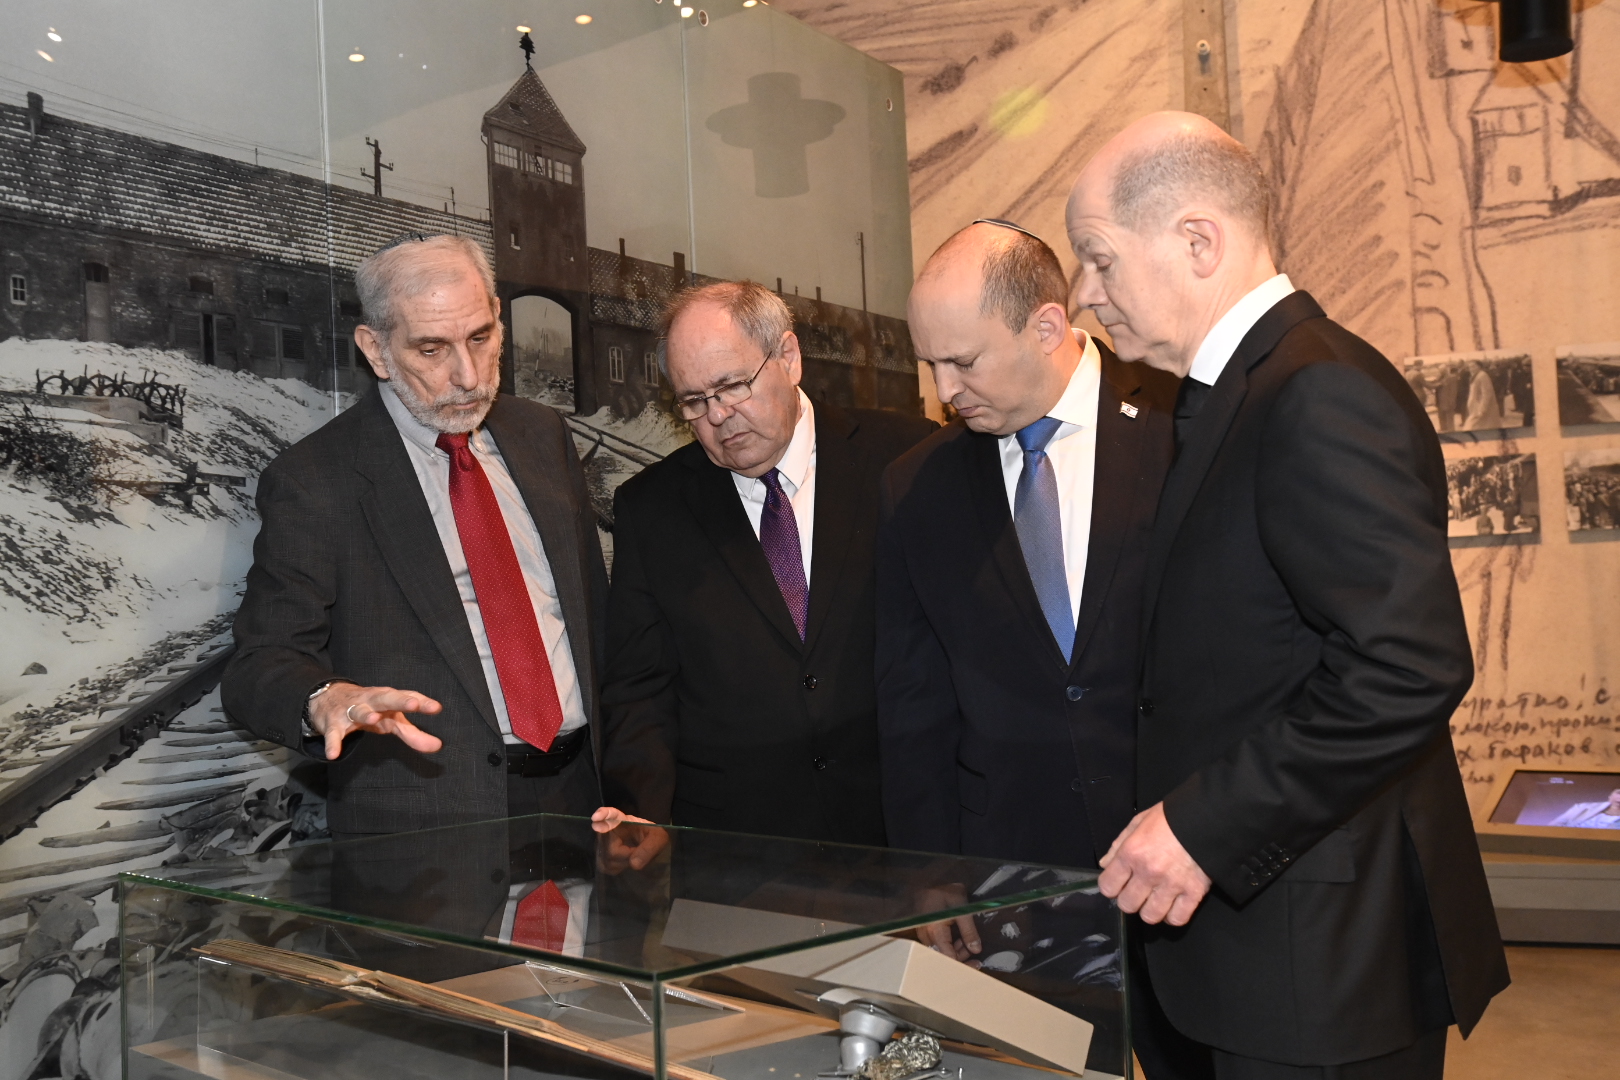 Chancellor Scholz views the Auschwitz Album, which documents the arrival of transports of Hungarian Jews to the infamous death camp in the summer of 1944.